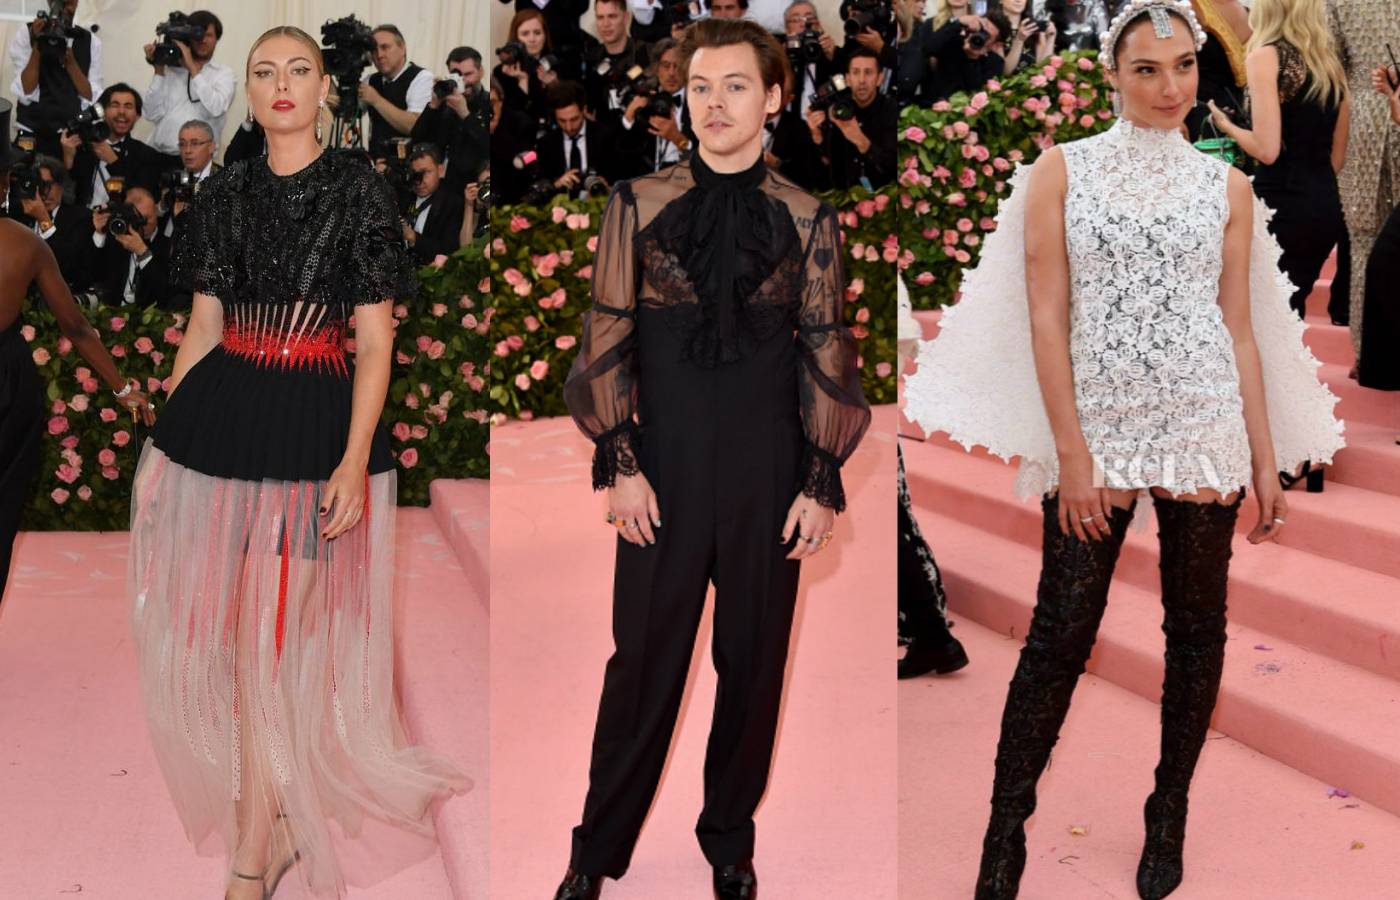 Glass reviews the best looks from the Met Gala 2019 - The Glass Magazine